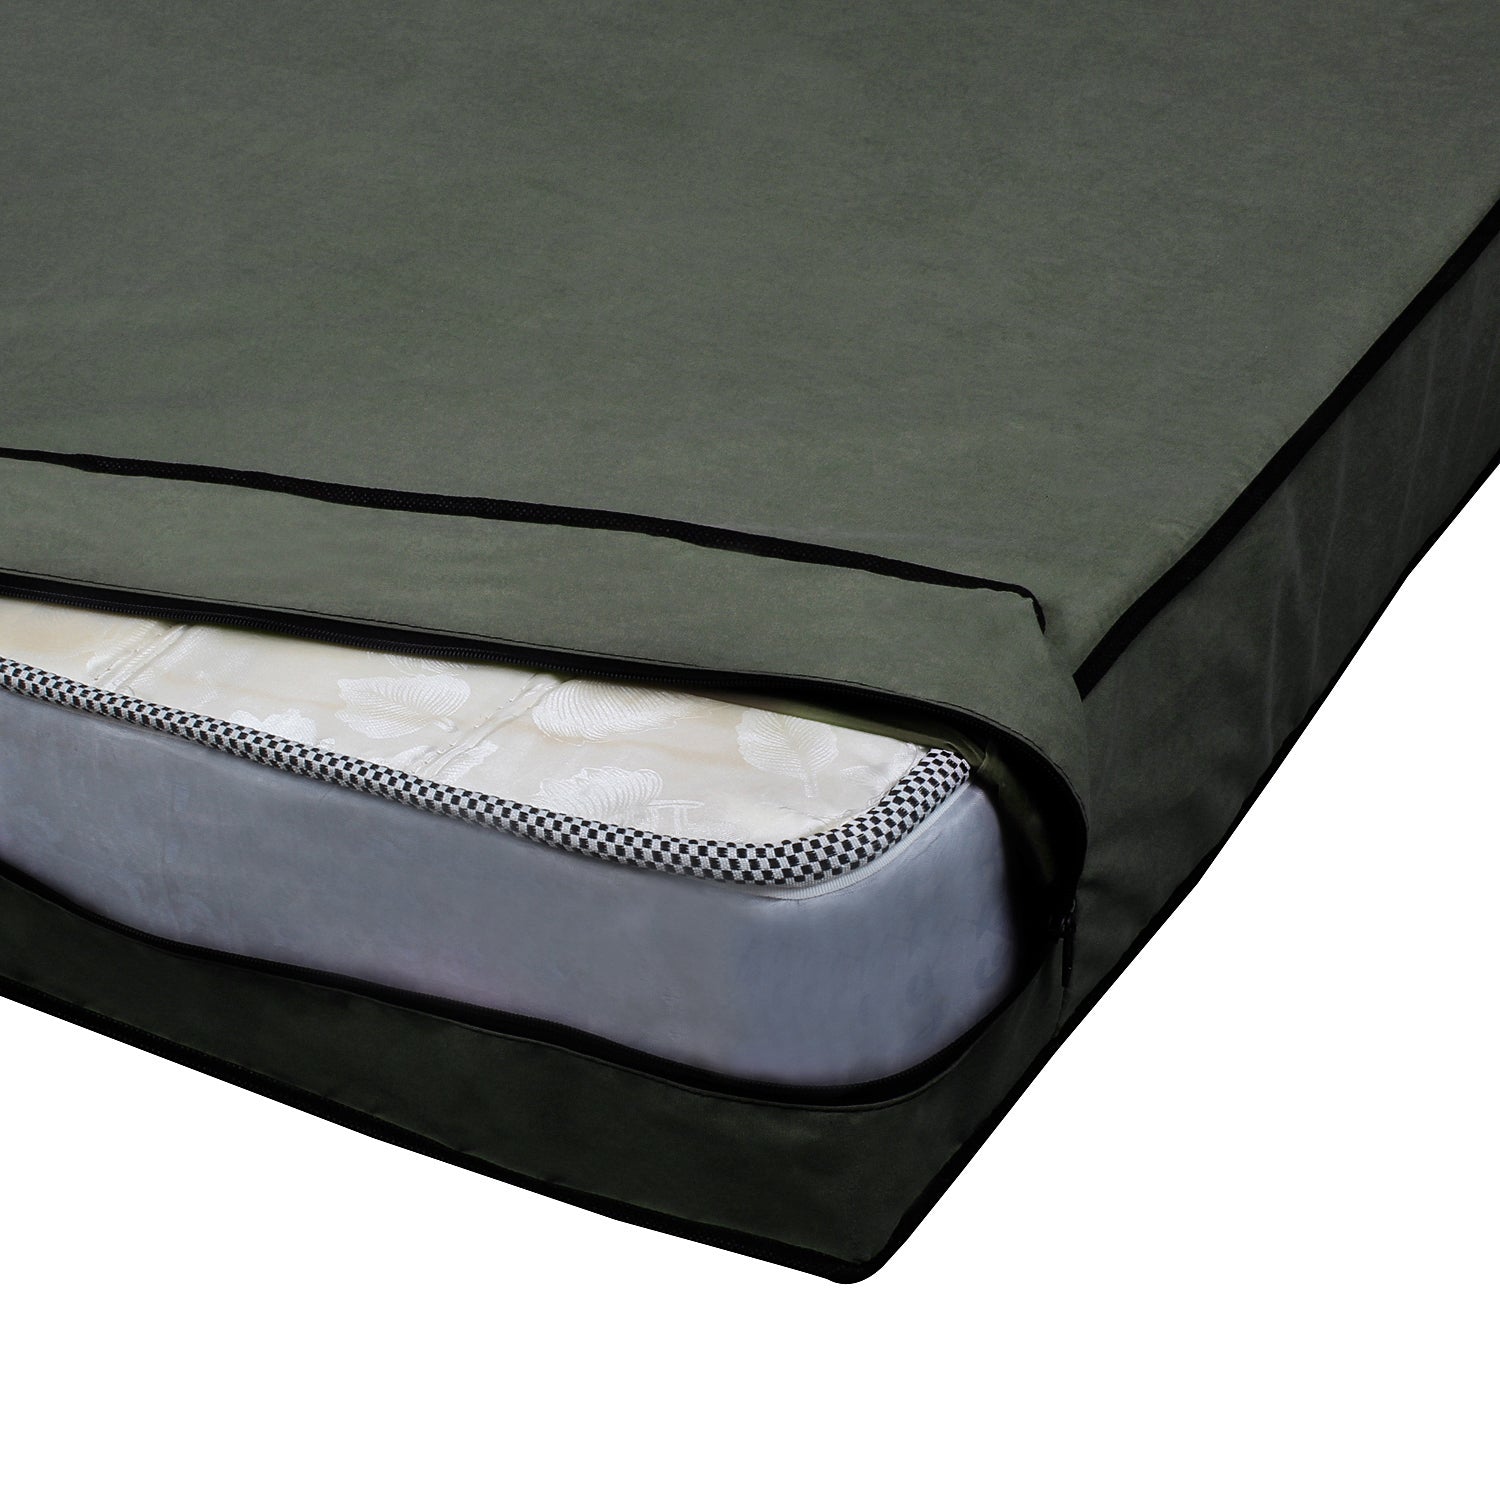 Waterproof Mattress Cover with Zipper, Mazestik Mattress Cover (Green, Available in 17 Sizes)